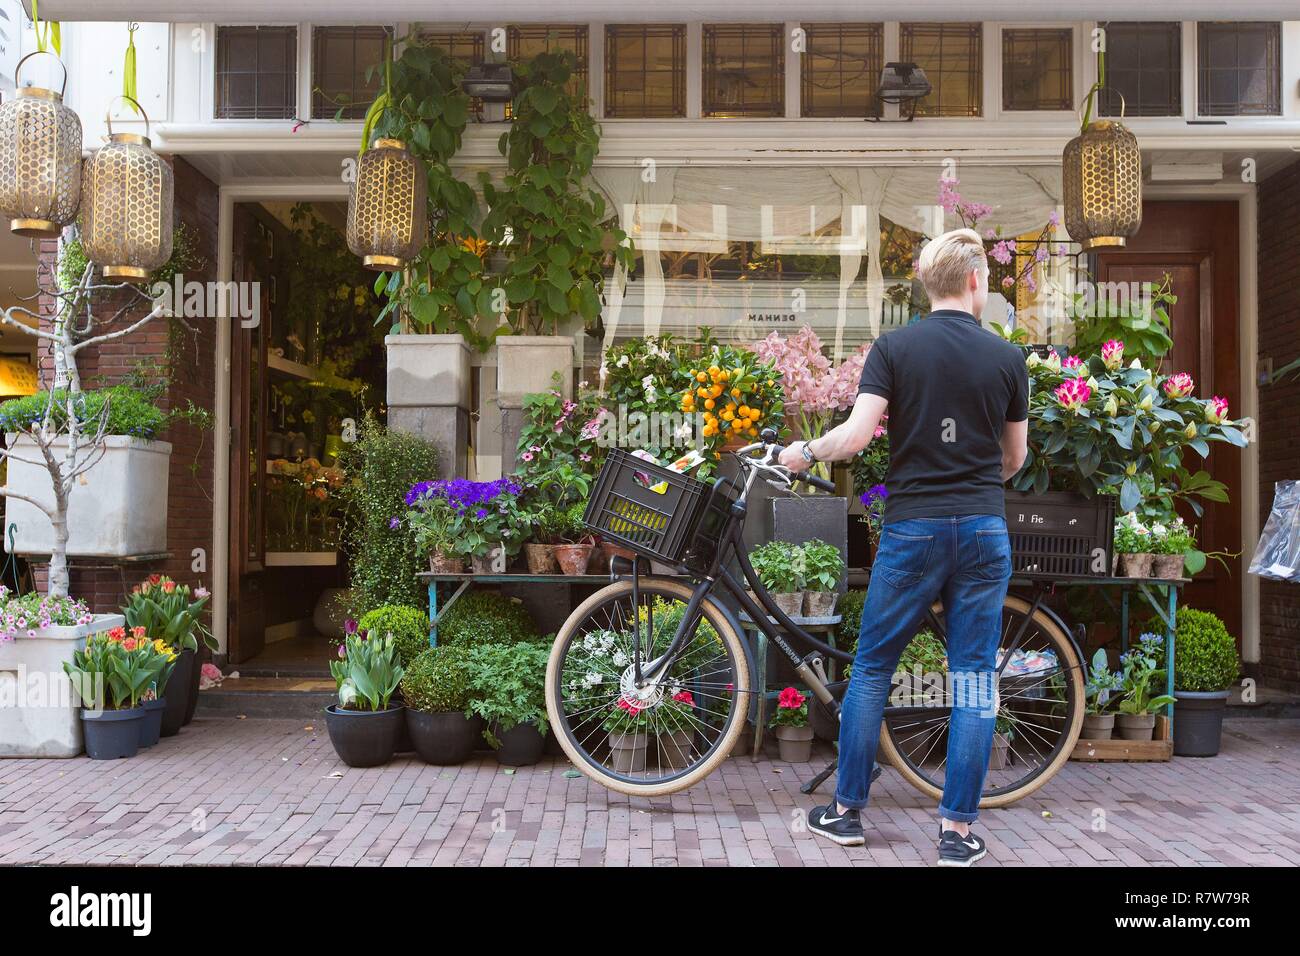 Netherlands, Northern Holland province, Amsterdam, flower shop in the Jordaan district Stock Photo